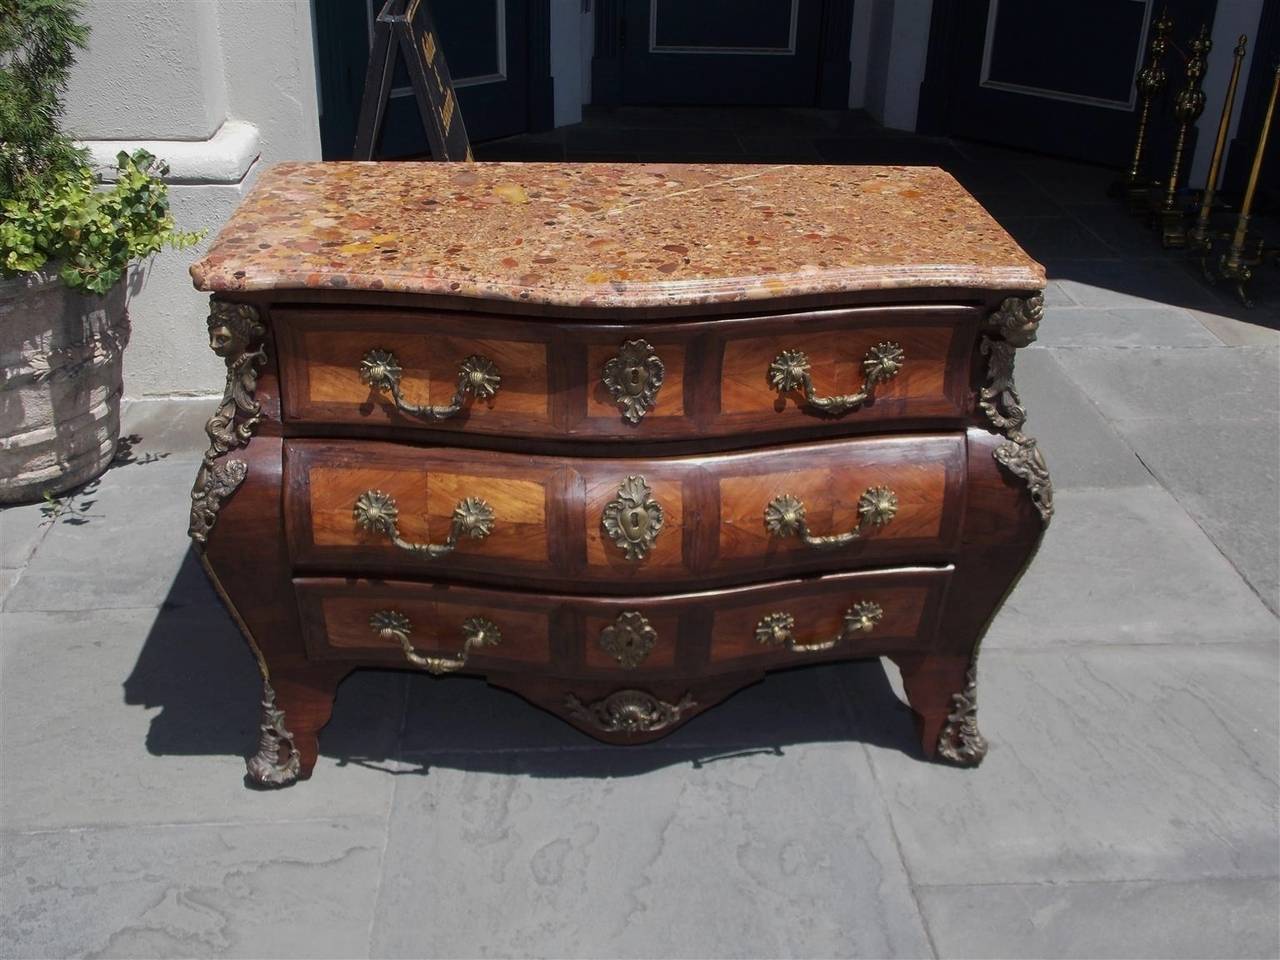 Pair of Italian zebra wood three-drawer marble top Bombay commodes with inlaid fruit wood front drawers and side panels, original ormolu mounts, escutcheons, and decorative pulls, terminating on front splayed and rear block feet, Late 19th century.